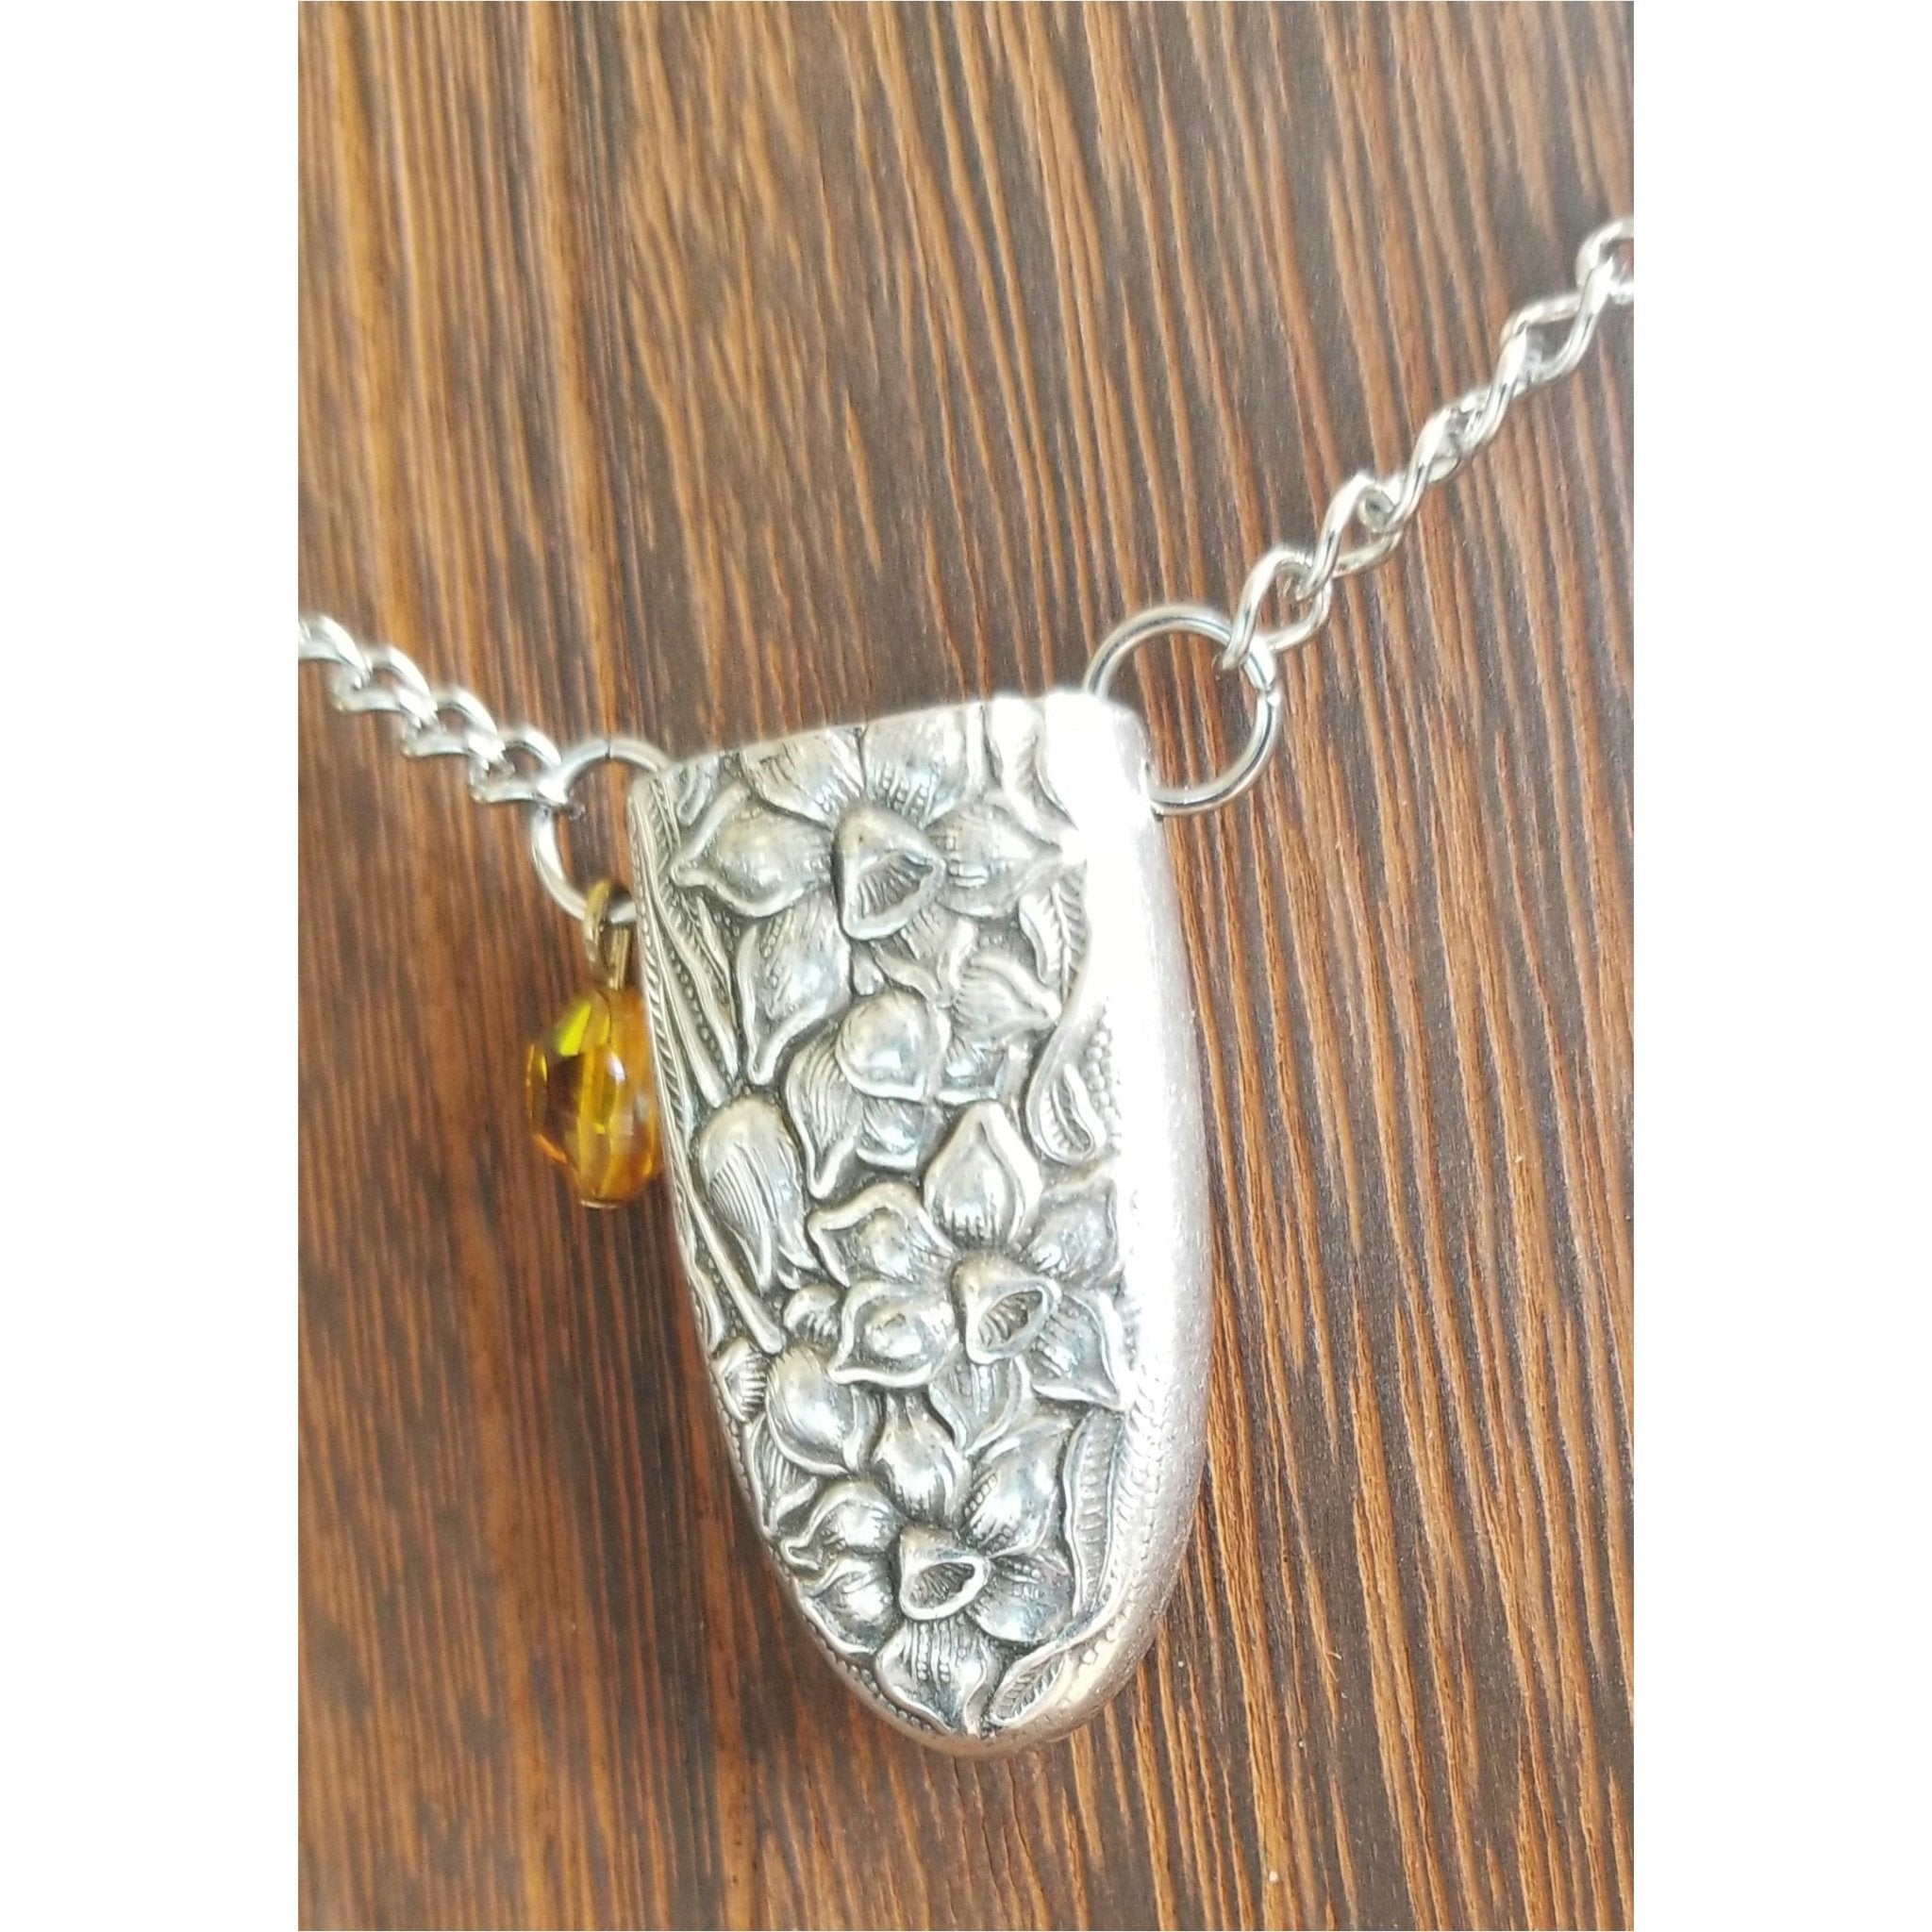 Essential oil Diffuser necklace Young Living  https://www.etsy.com/shop/PeaceLoveandTruth?ref=hdr_sho… | Essential oil  necklace diffuser, Diffuser necklace, Necklace